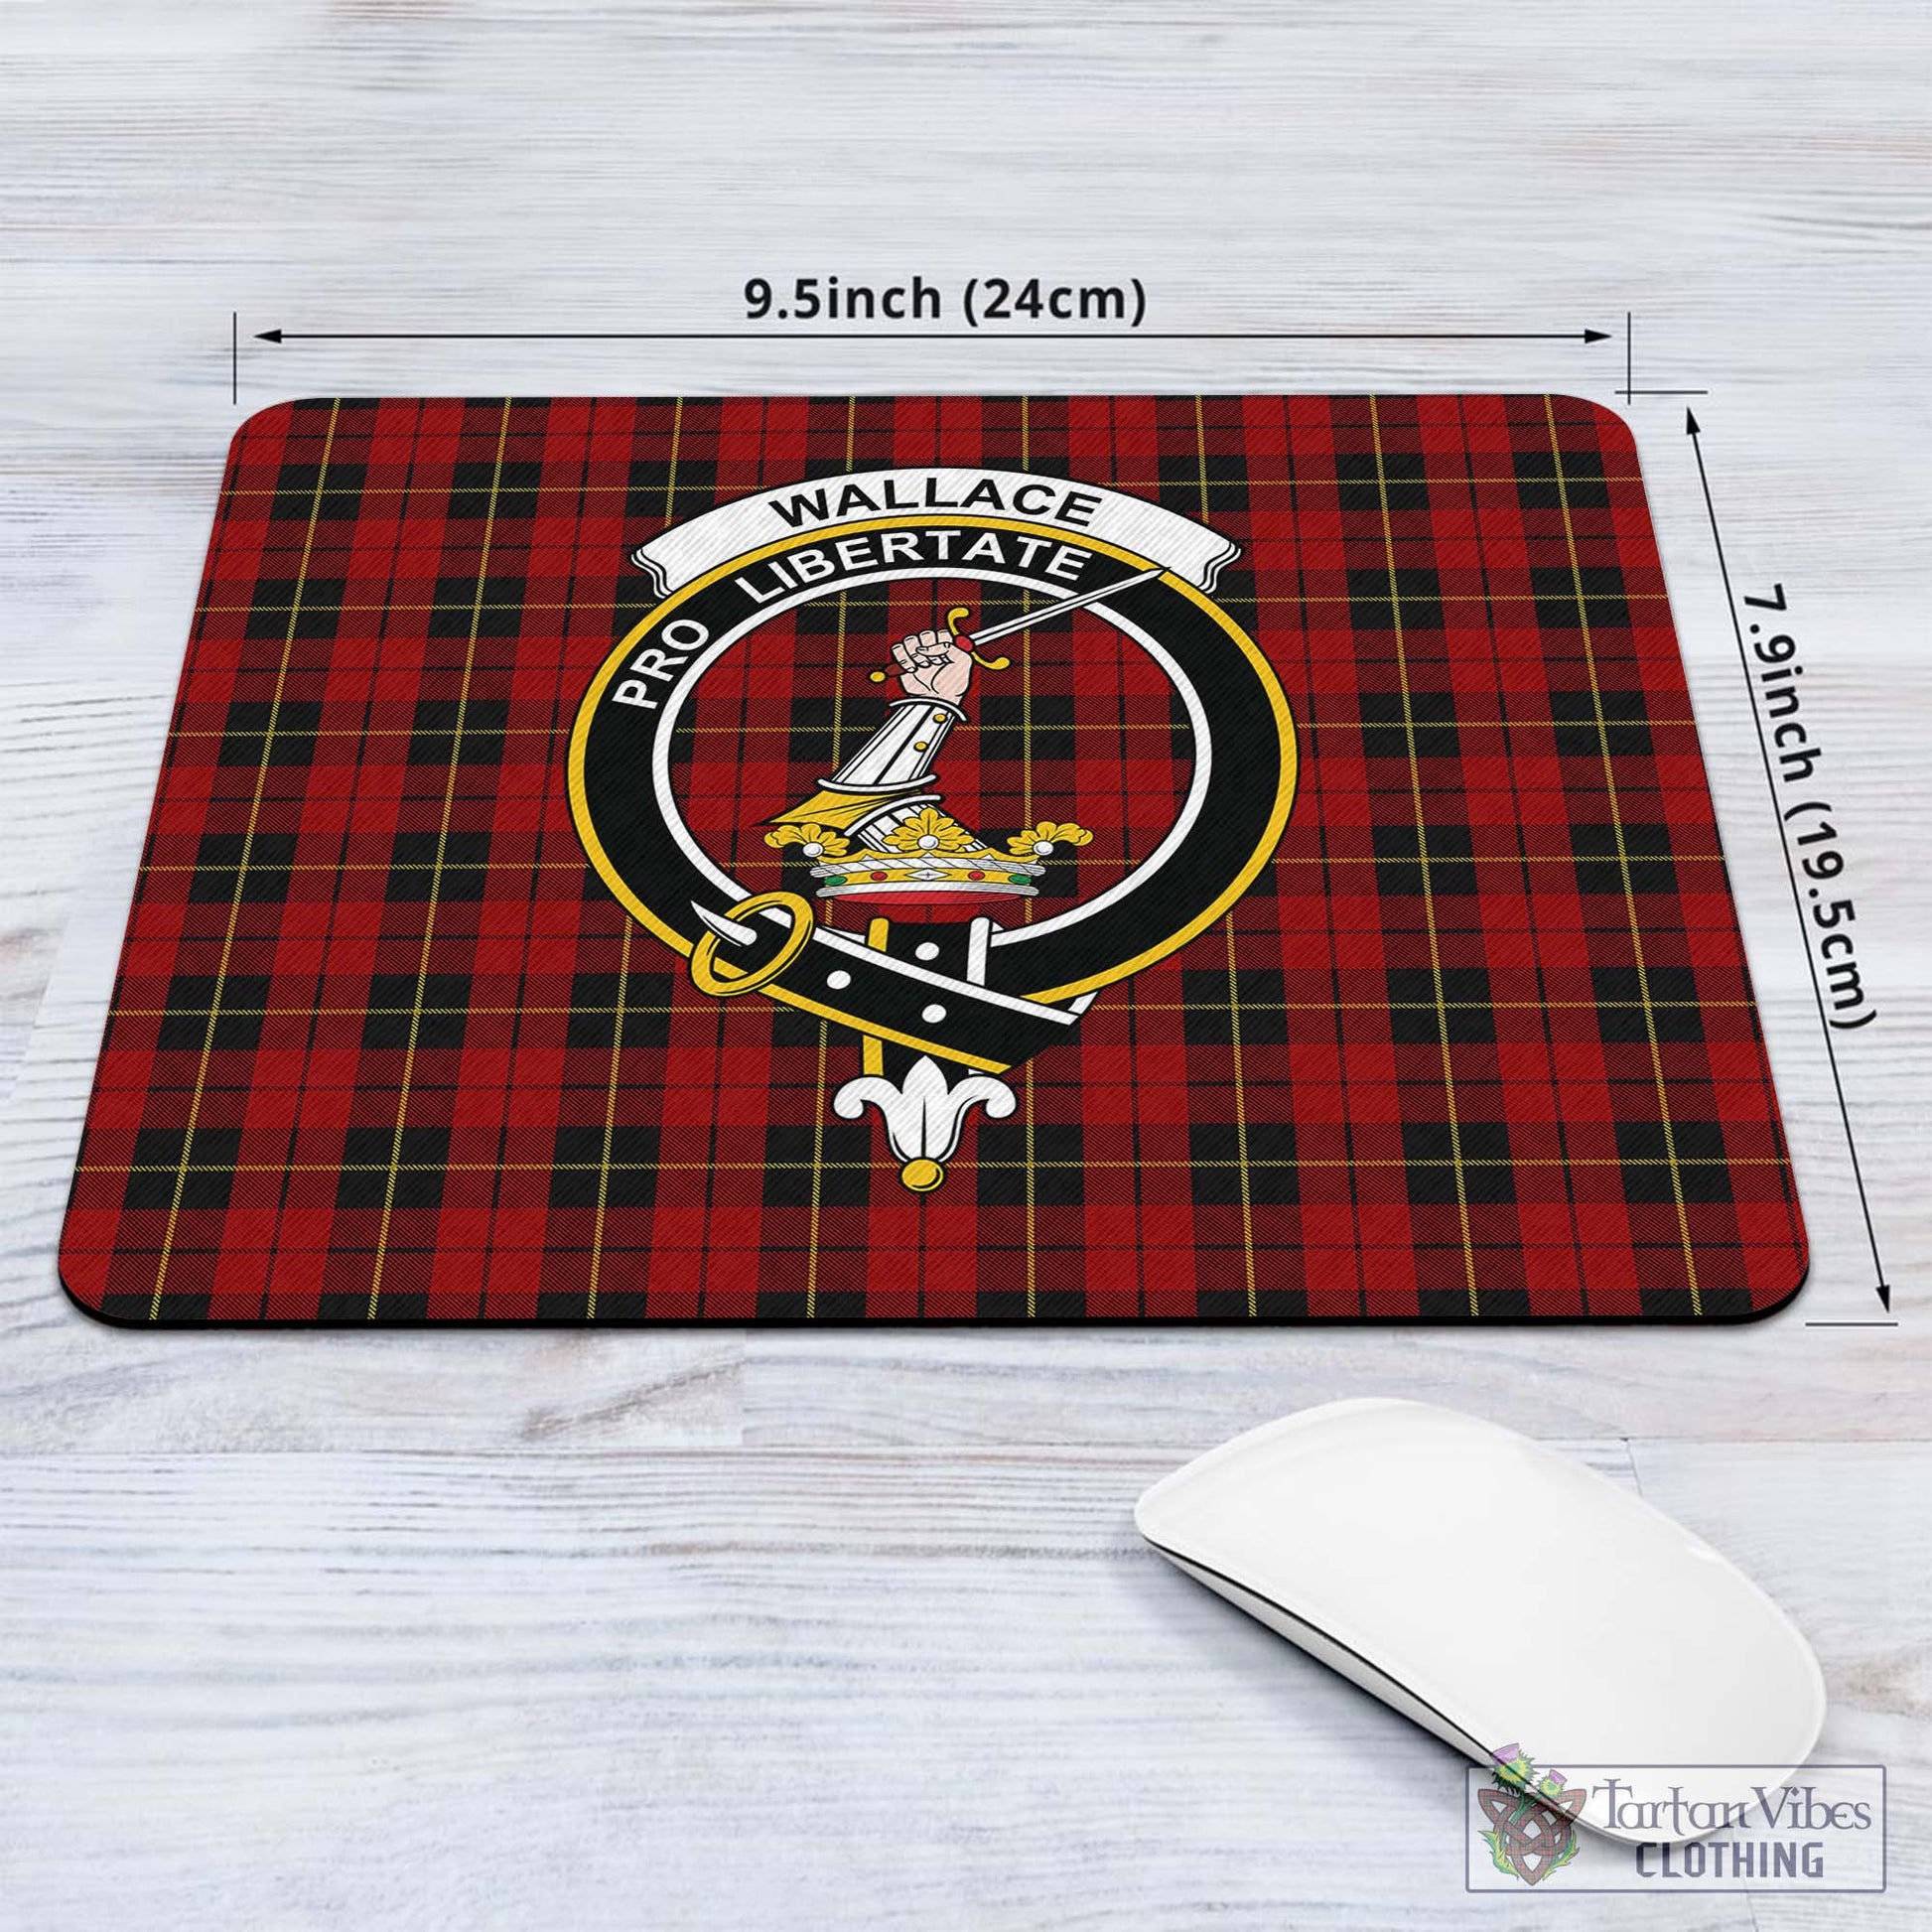 Tartan Vibes Clothing Wallace Tartan Mouse Pad with Family Crest